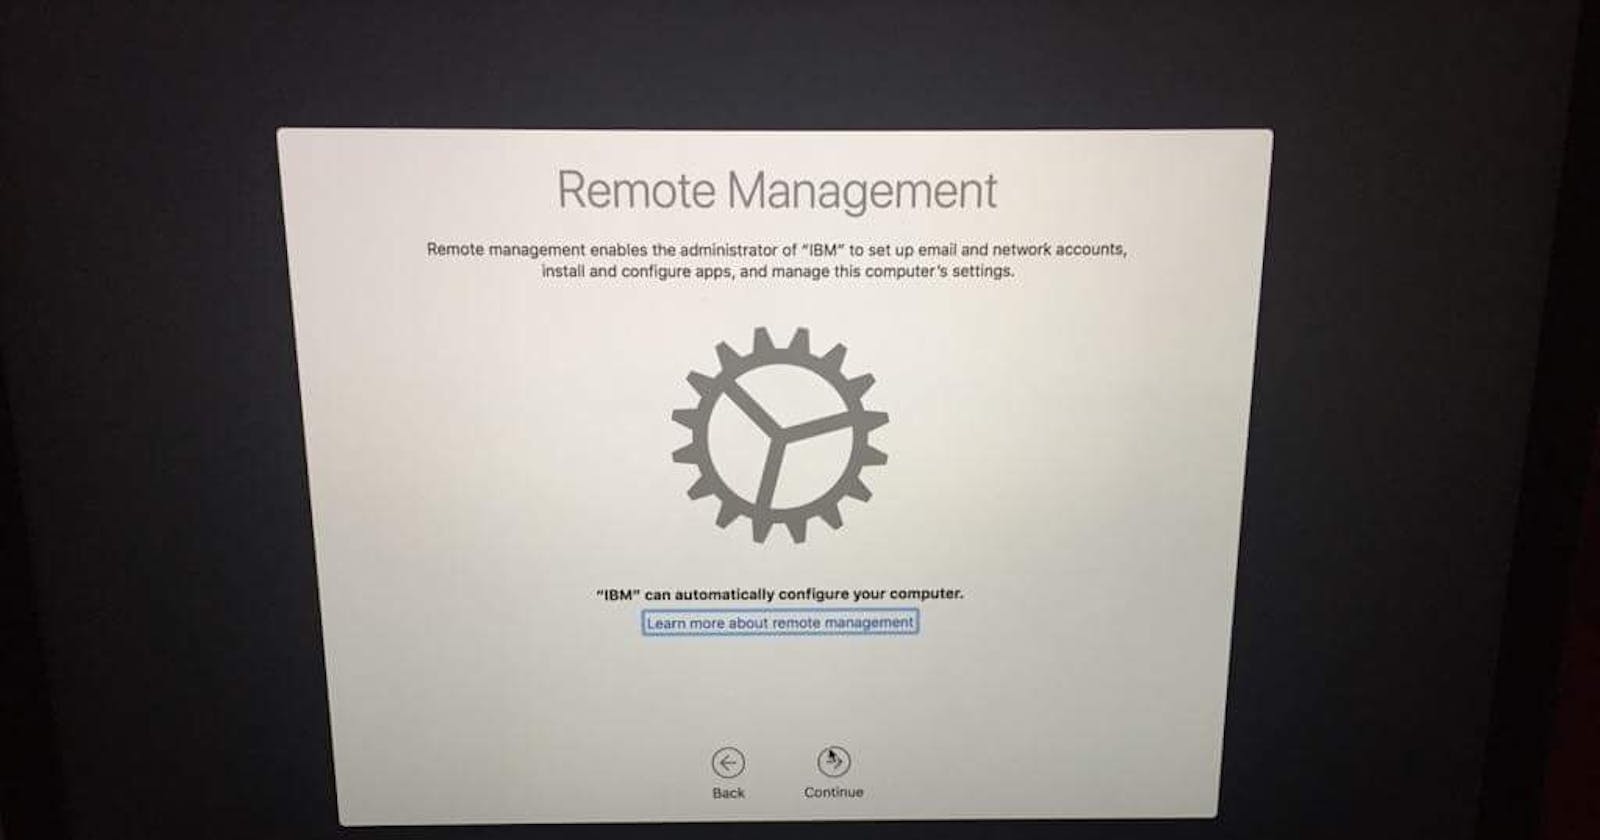 How To Disable Remote Management and Device Enrollment Notifications on Mac Os.